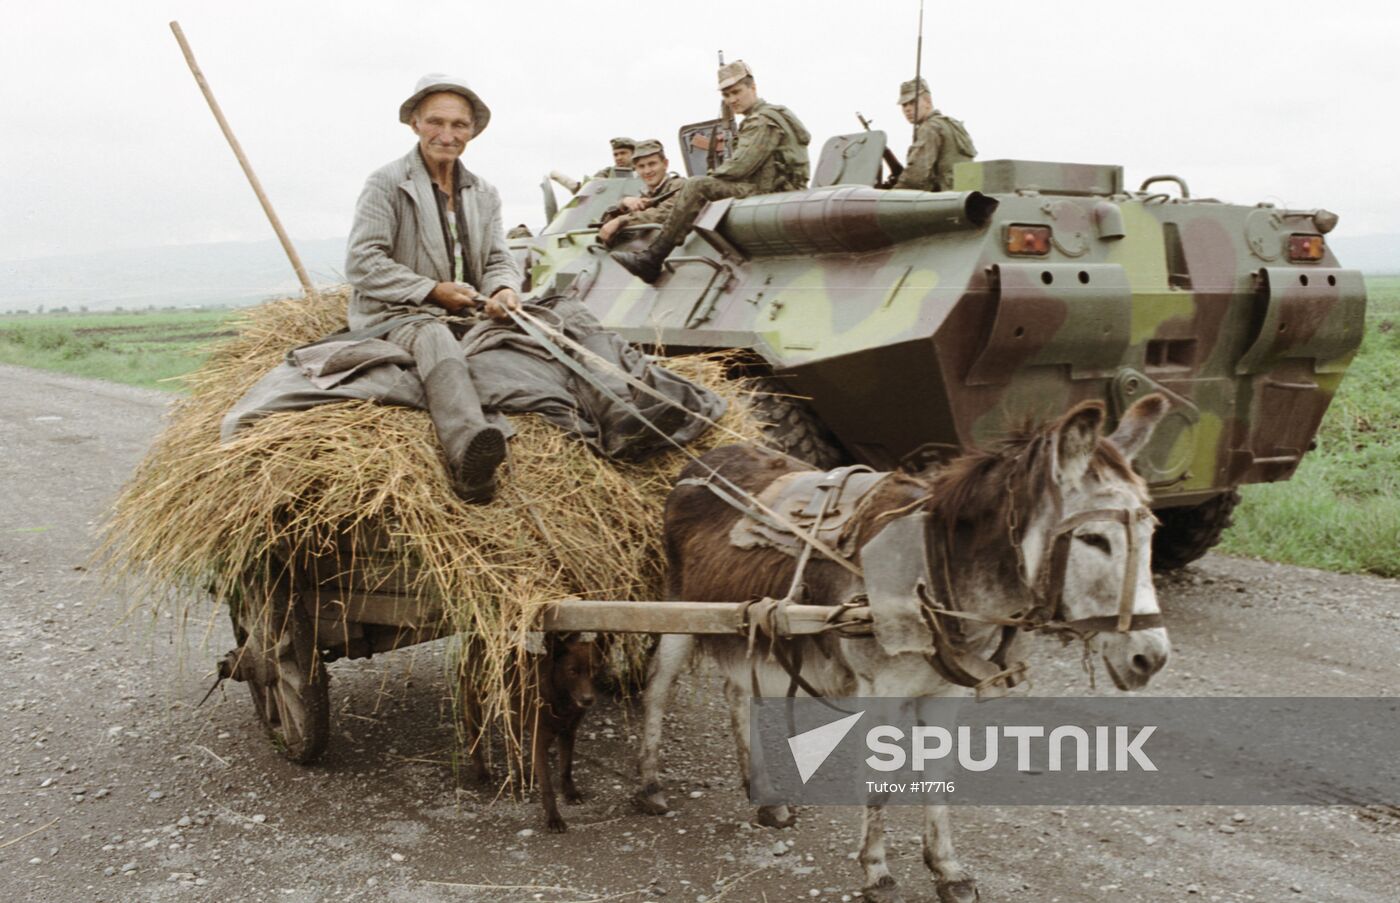 LOCAL HAY CART DONKEY FIGHTERS PATROLLING ARMORED TROOP-CARRIER